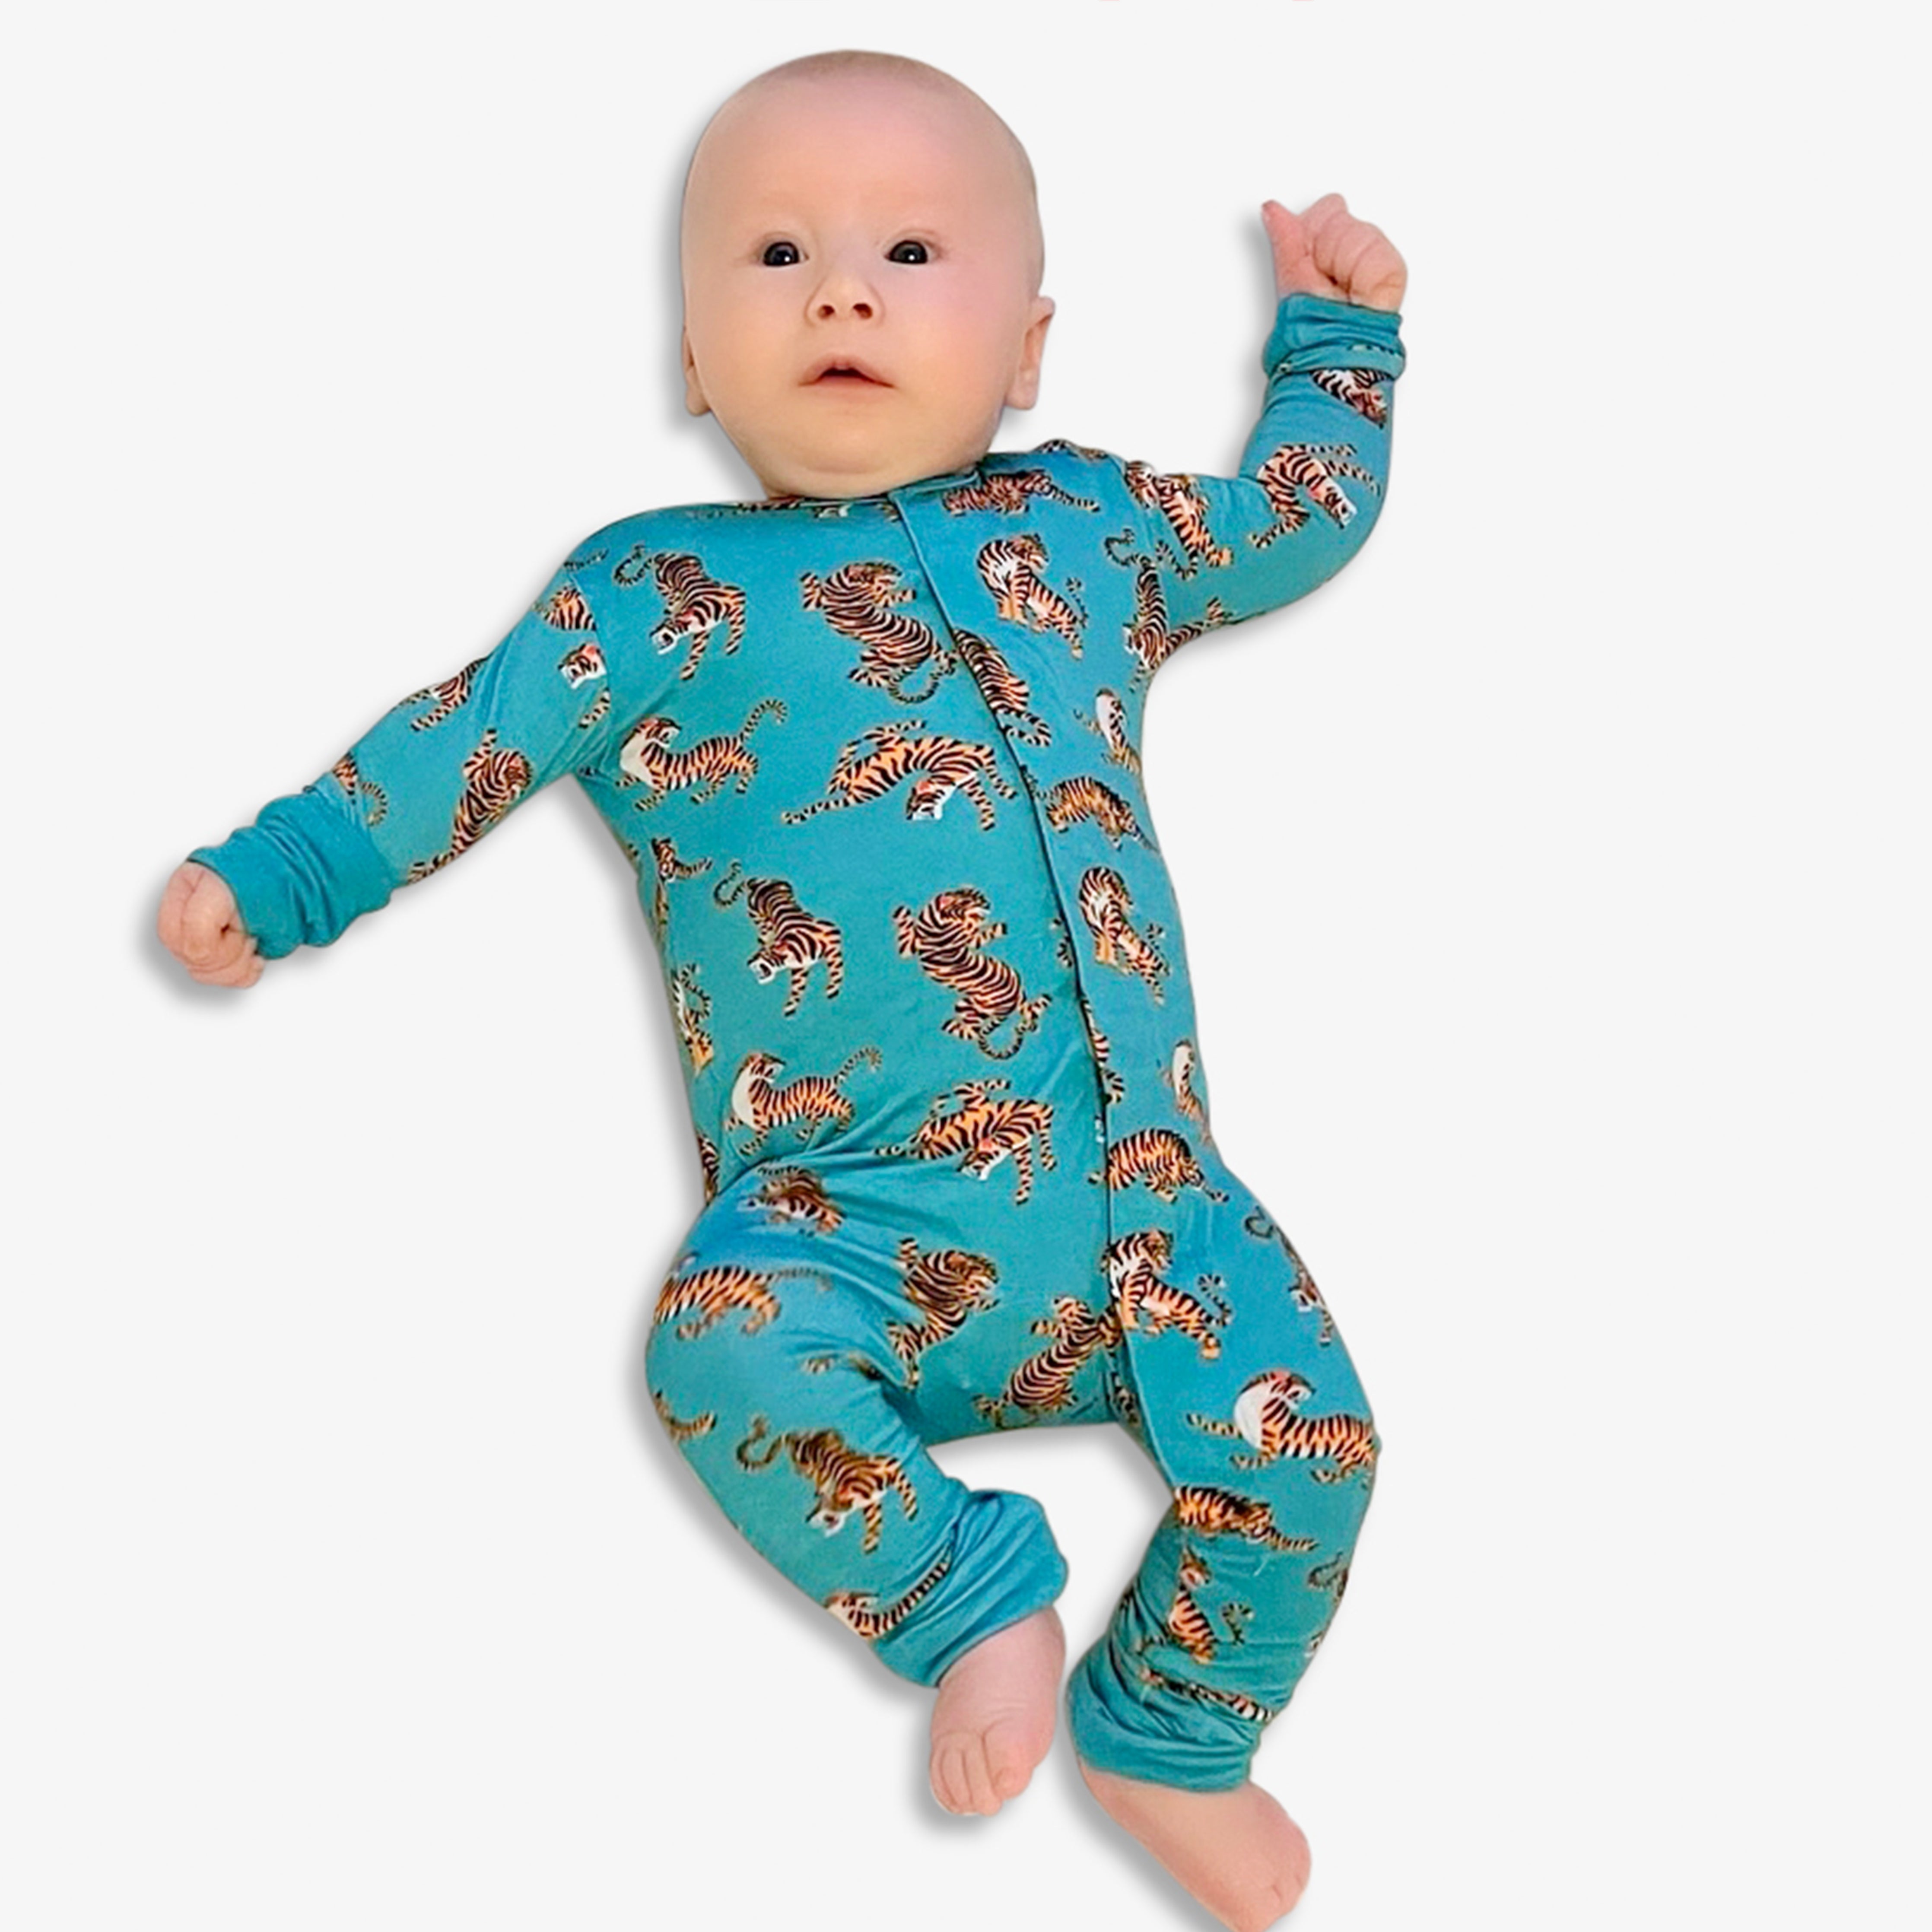 Woman Onesies, Off 80% Great Deal 